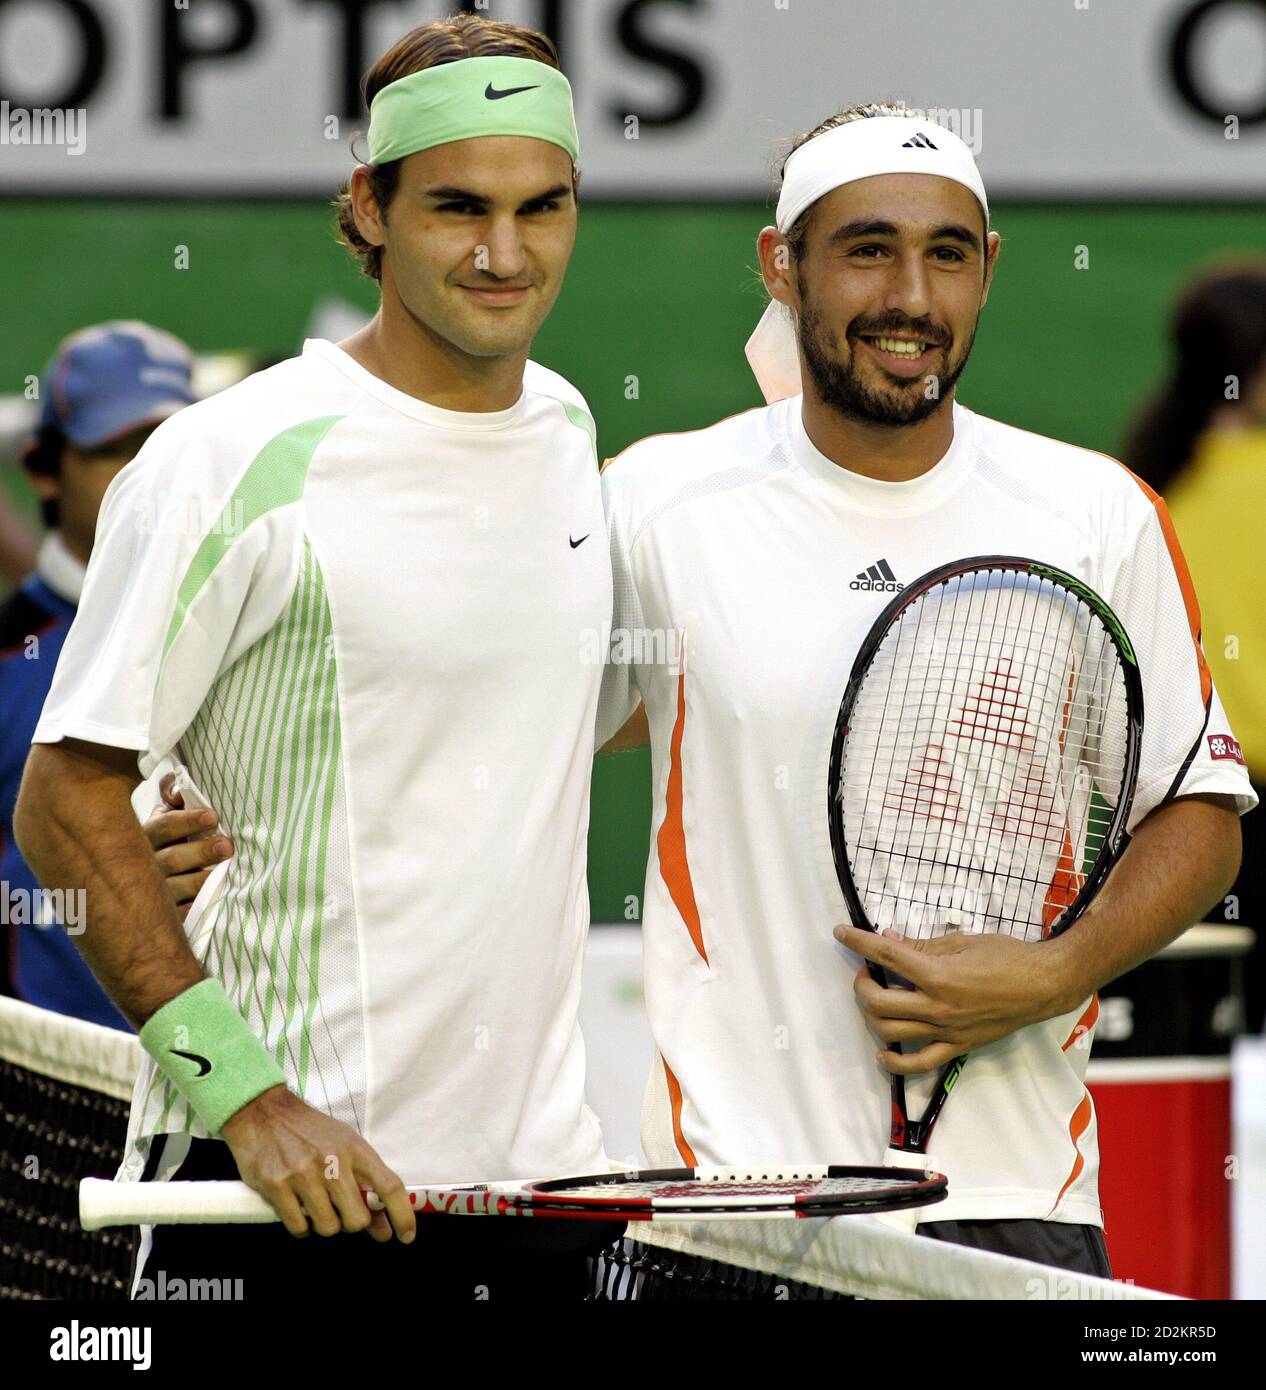 Roger Federer of Switzerland (L) and Marcos Baghdatis of Cyprus pose before  the start of the men's singles final at the Australian Open tennis  tournament in Melbourne January 29, 2006. REUTERS/Tim Wimborne